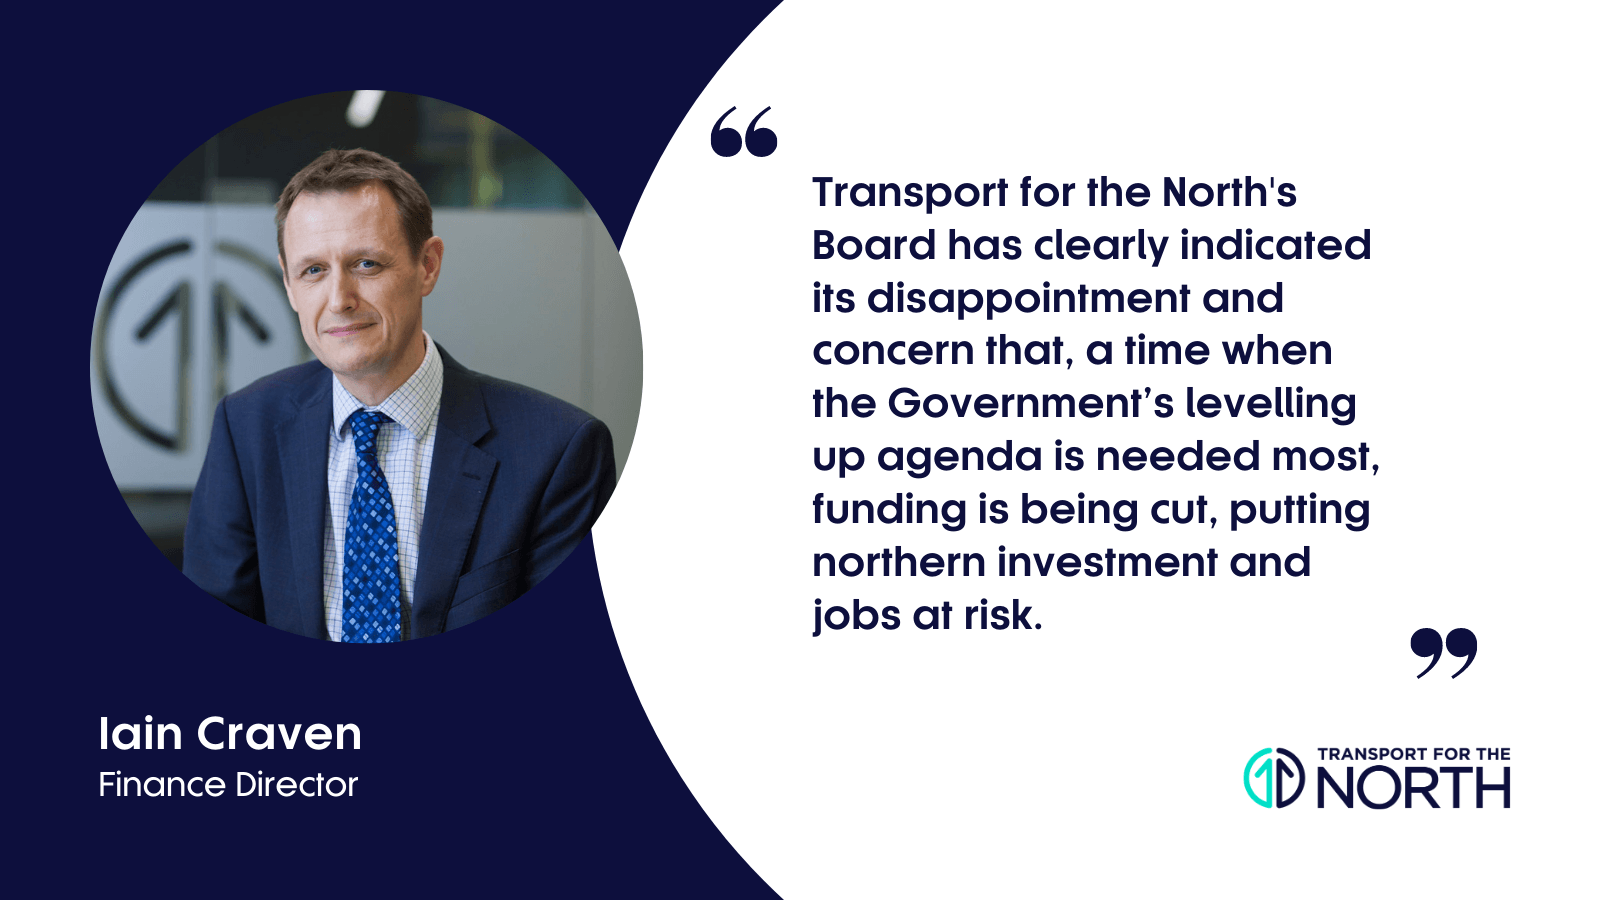 Iain Craven, Finance Director at Transport for the North speaks on funding cuts